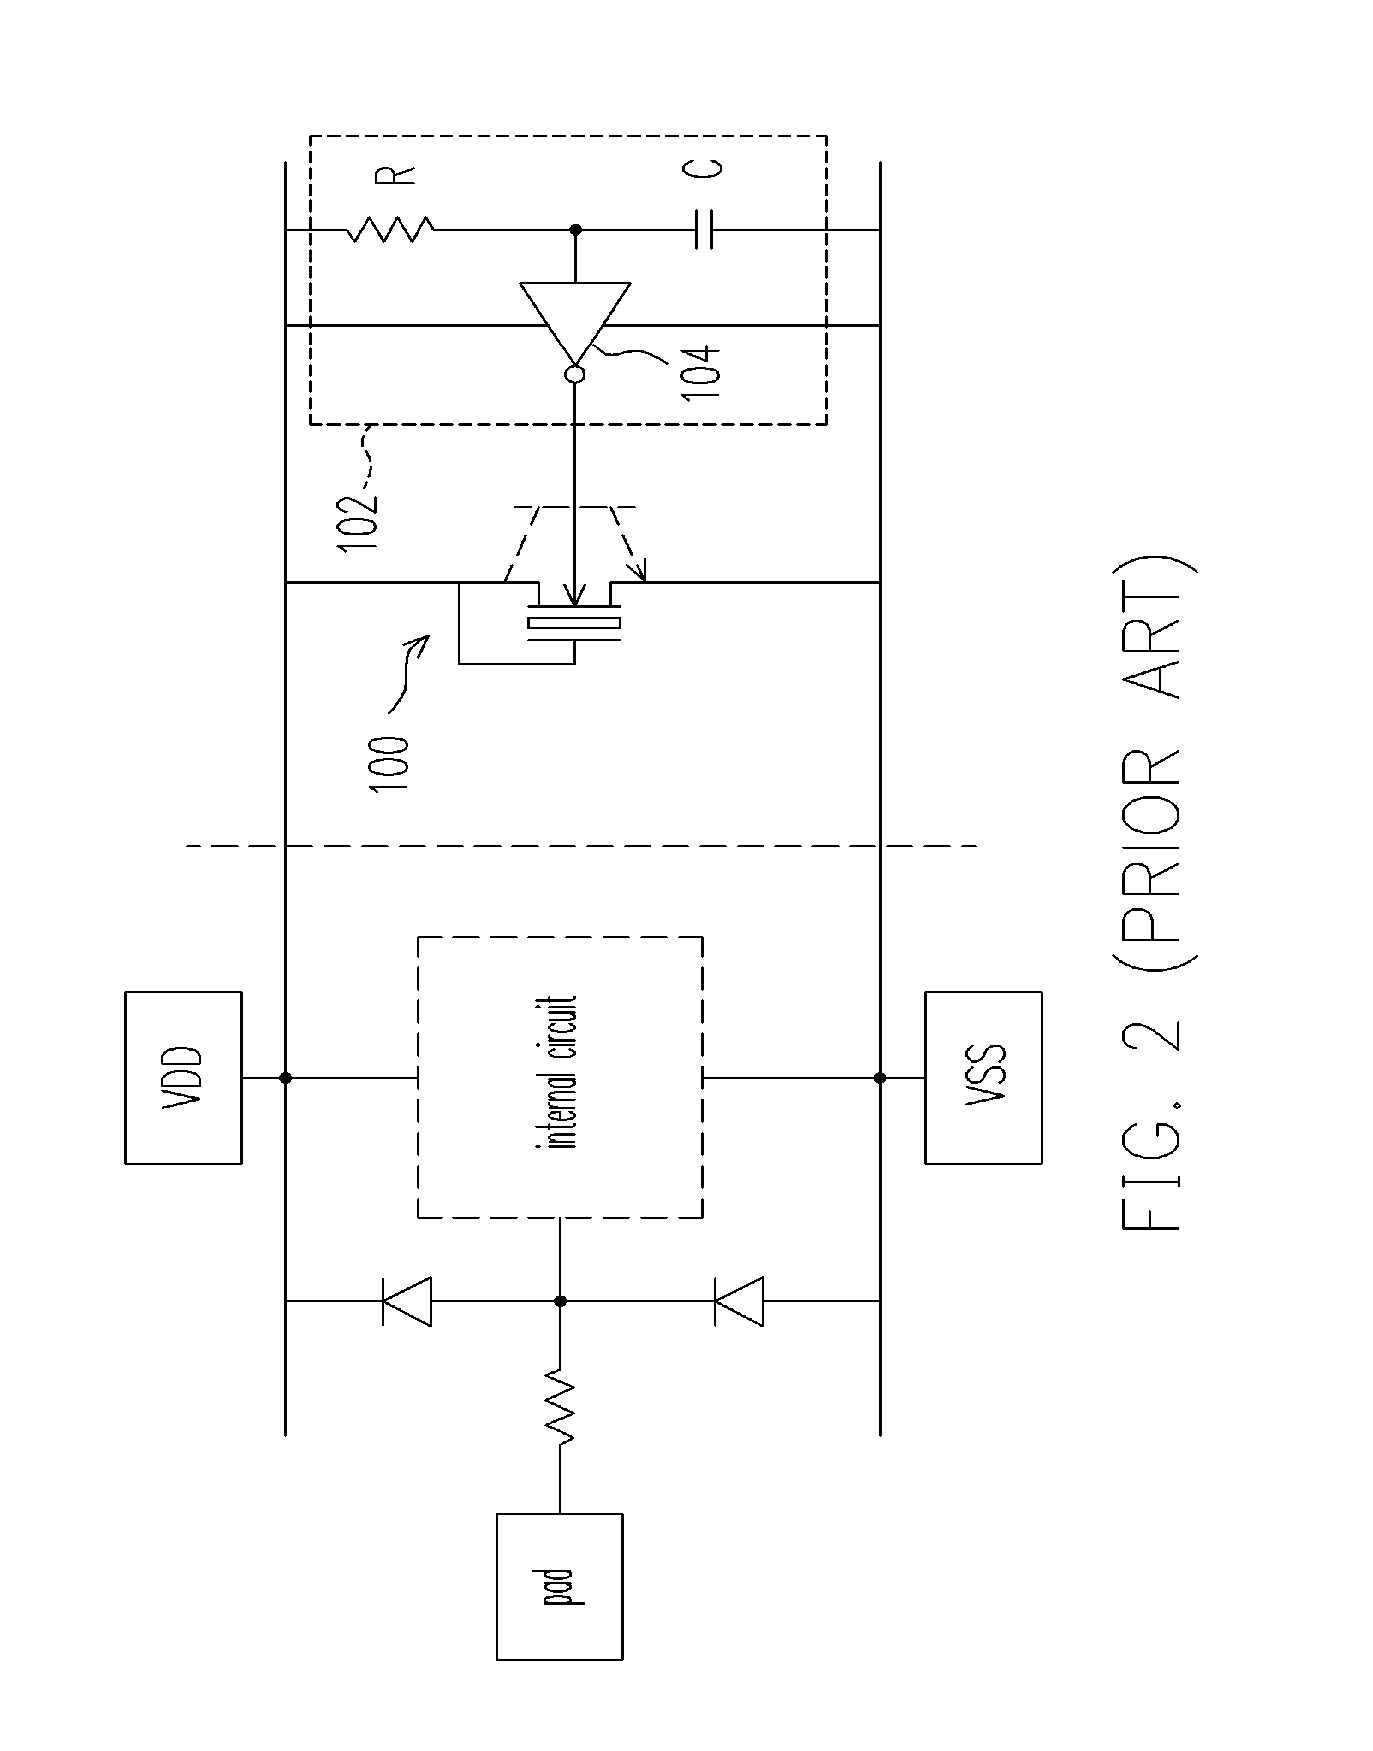 Electrostatic discharge protection apparatus for high-voltage products